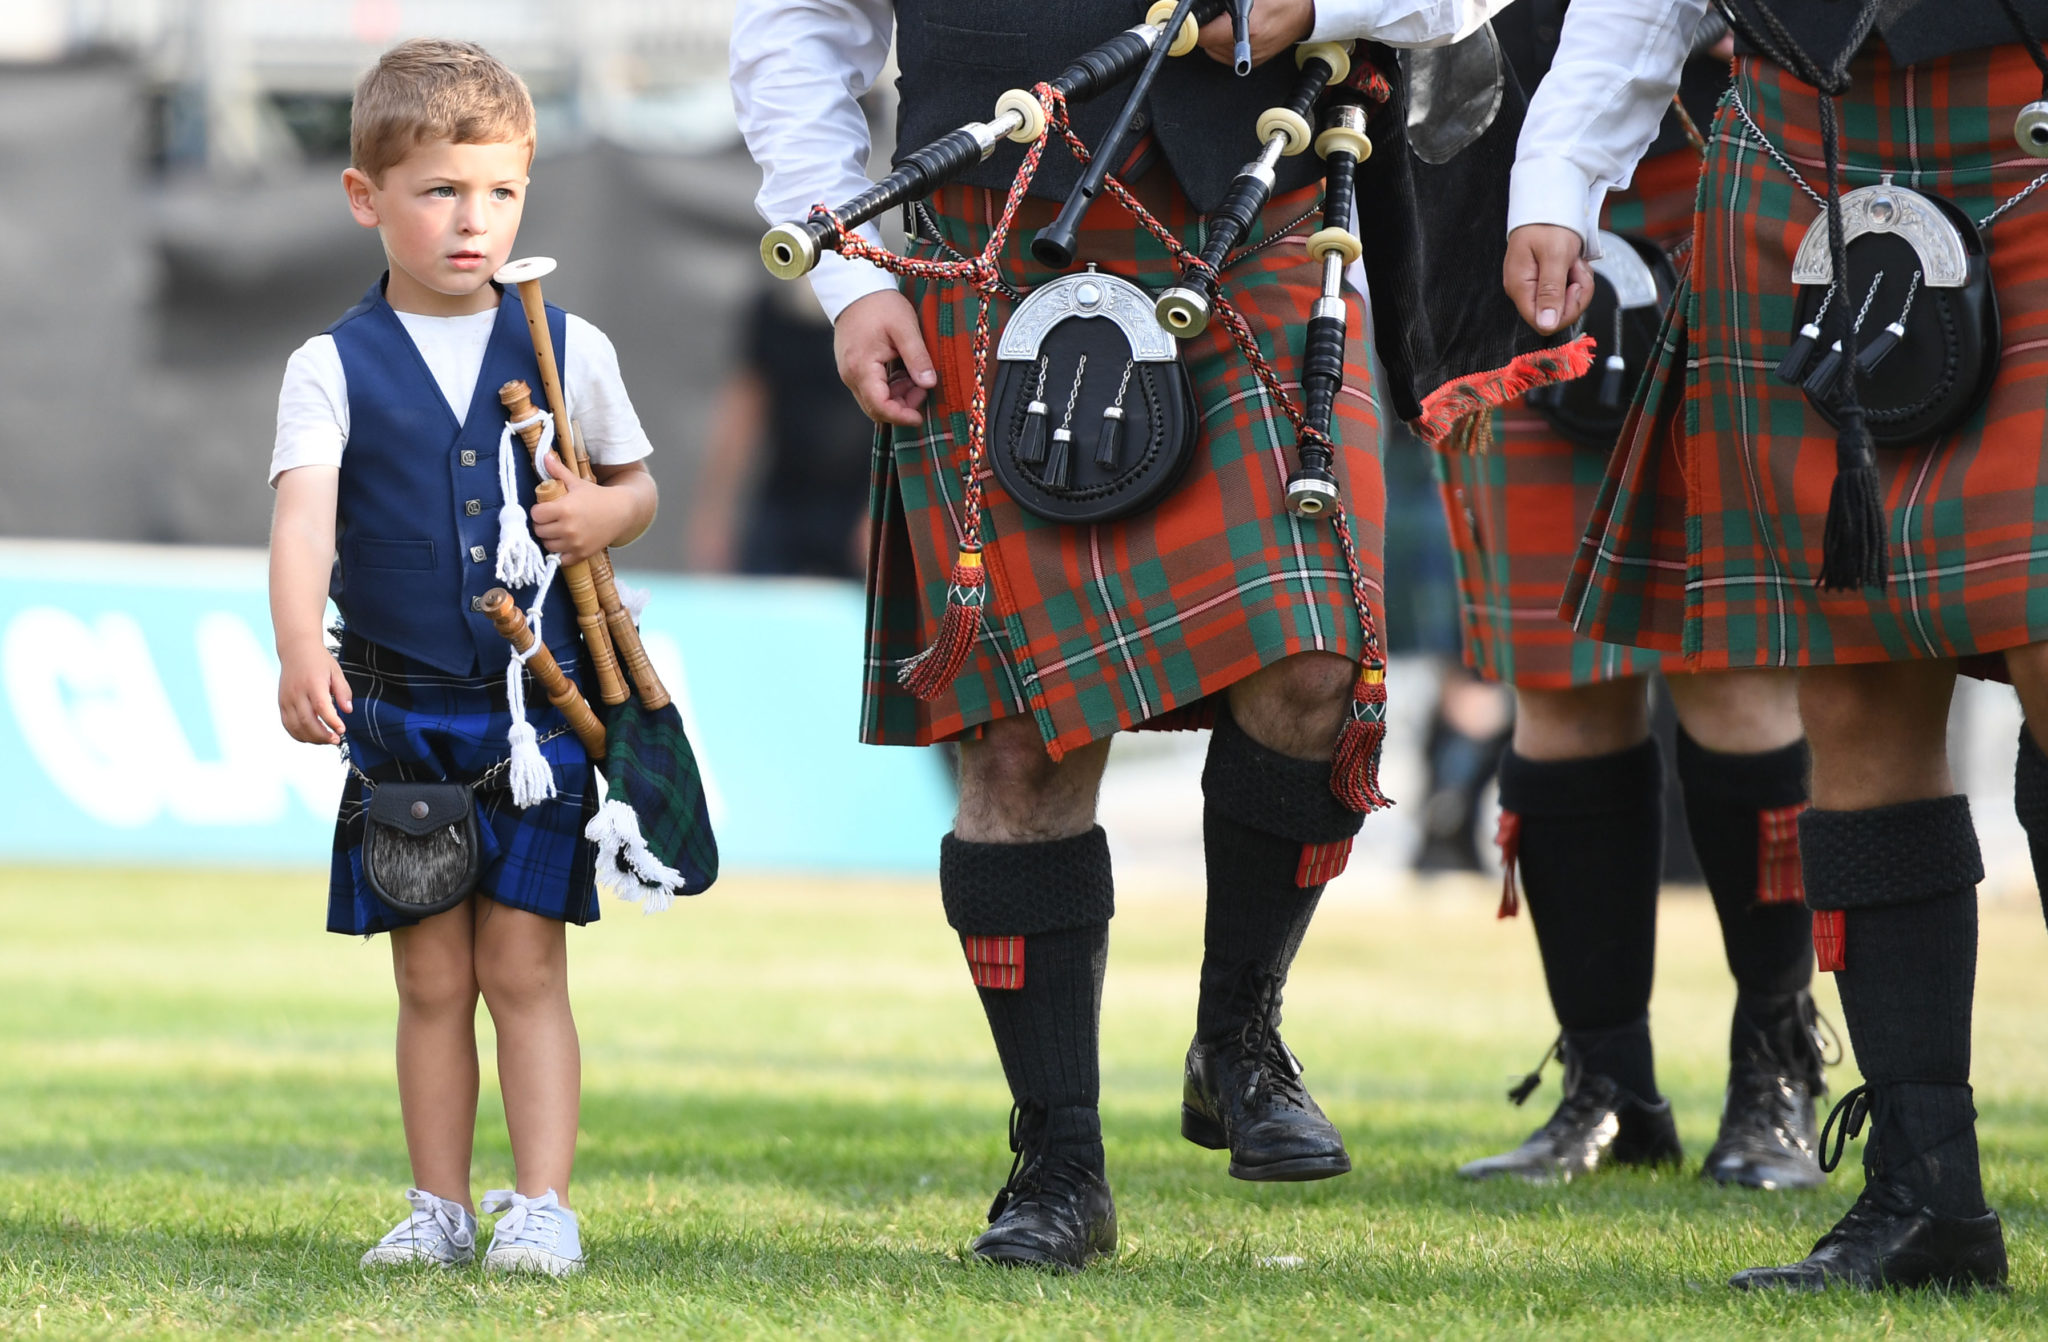 Field Marshal Montgomery win the World Pipe Band Championships The